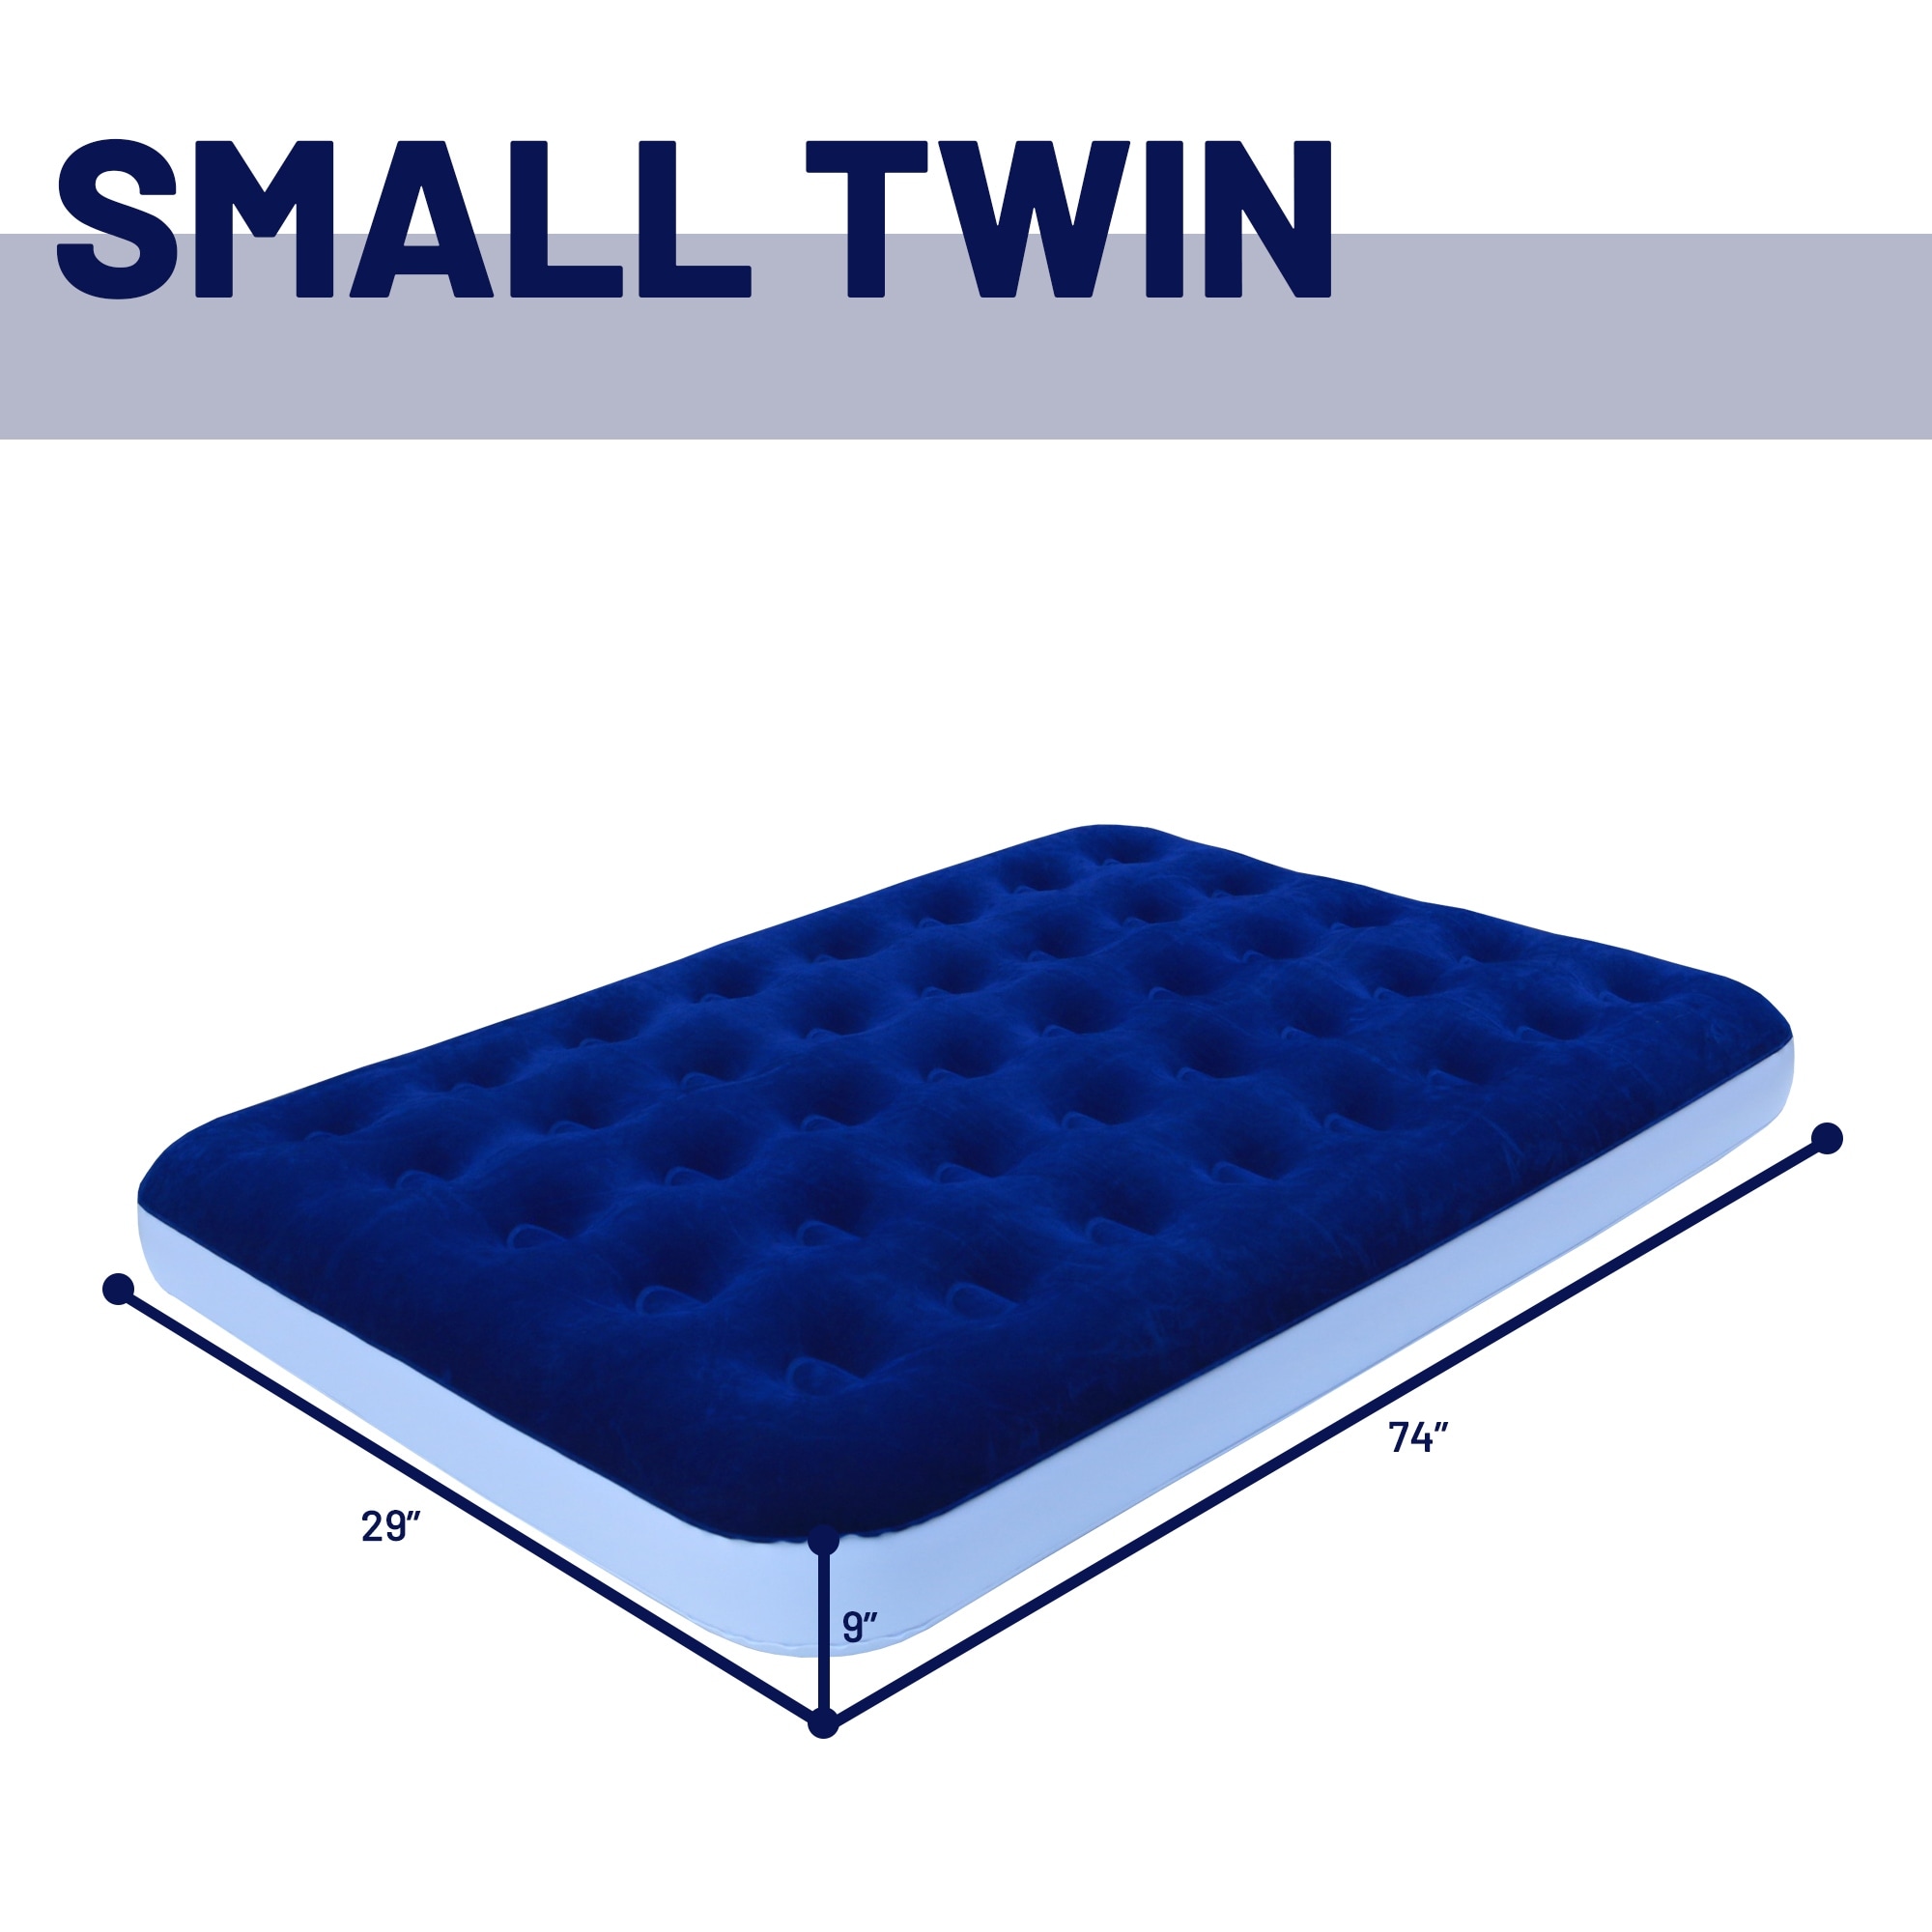 9-inch Durable Air Mattress With Comfort Coil Technology And High Capacity Pump  Good For Camping  Home And Portable Travel.